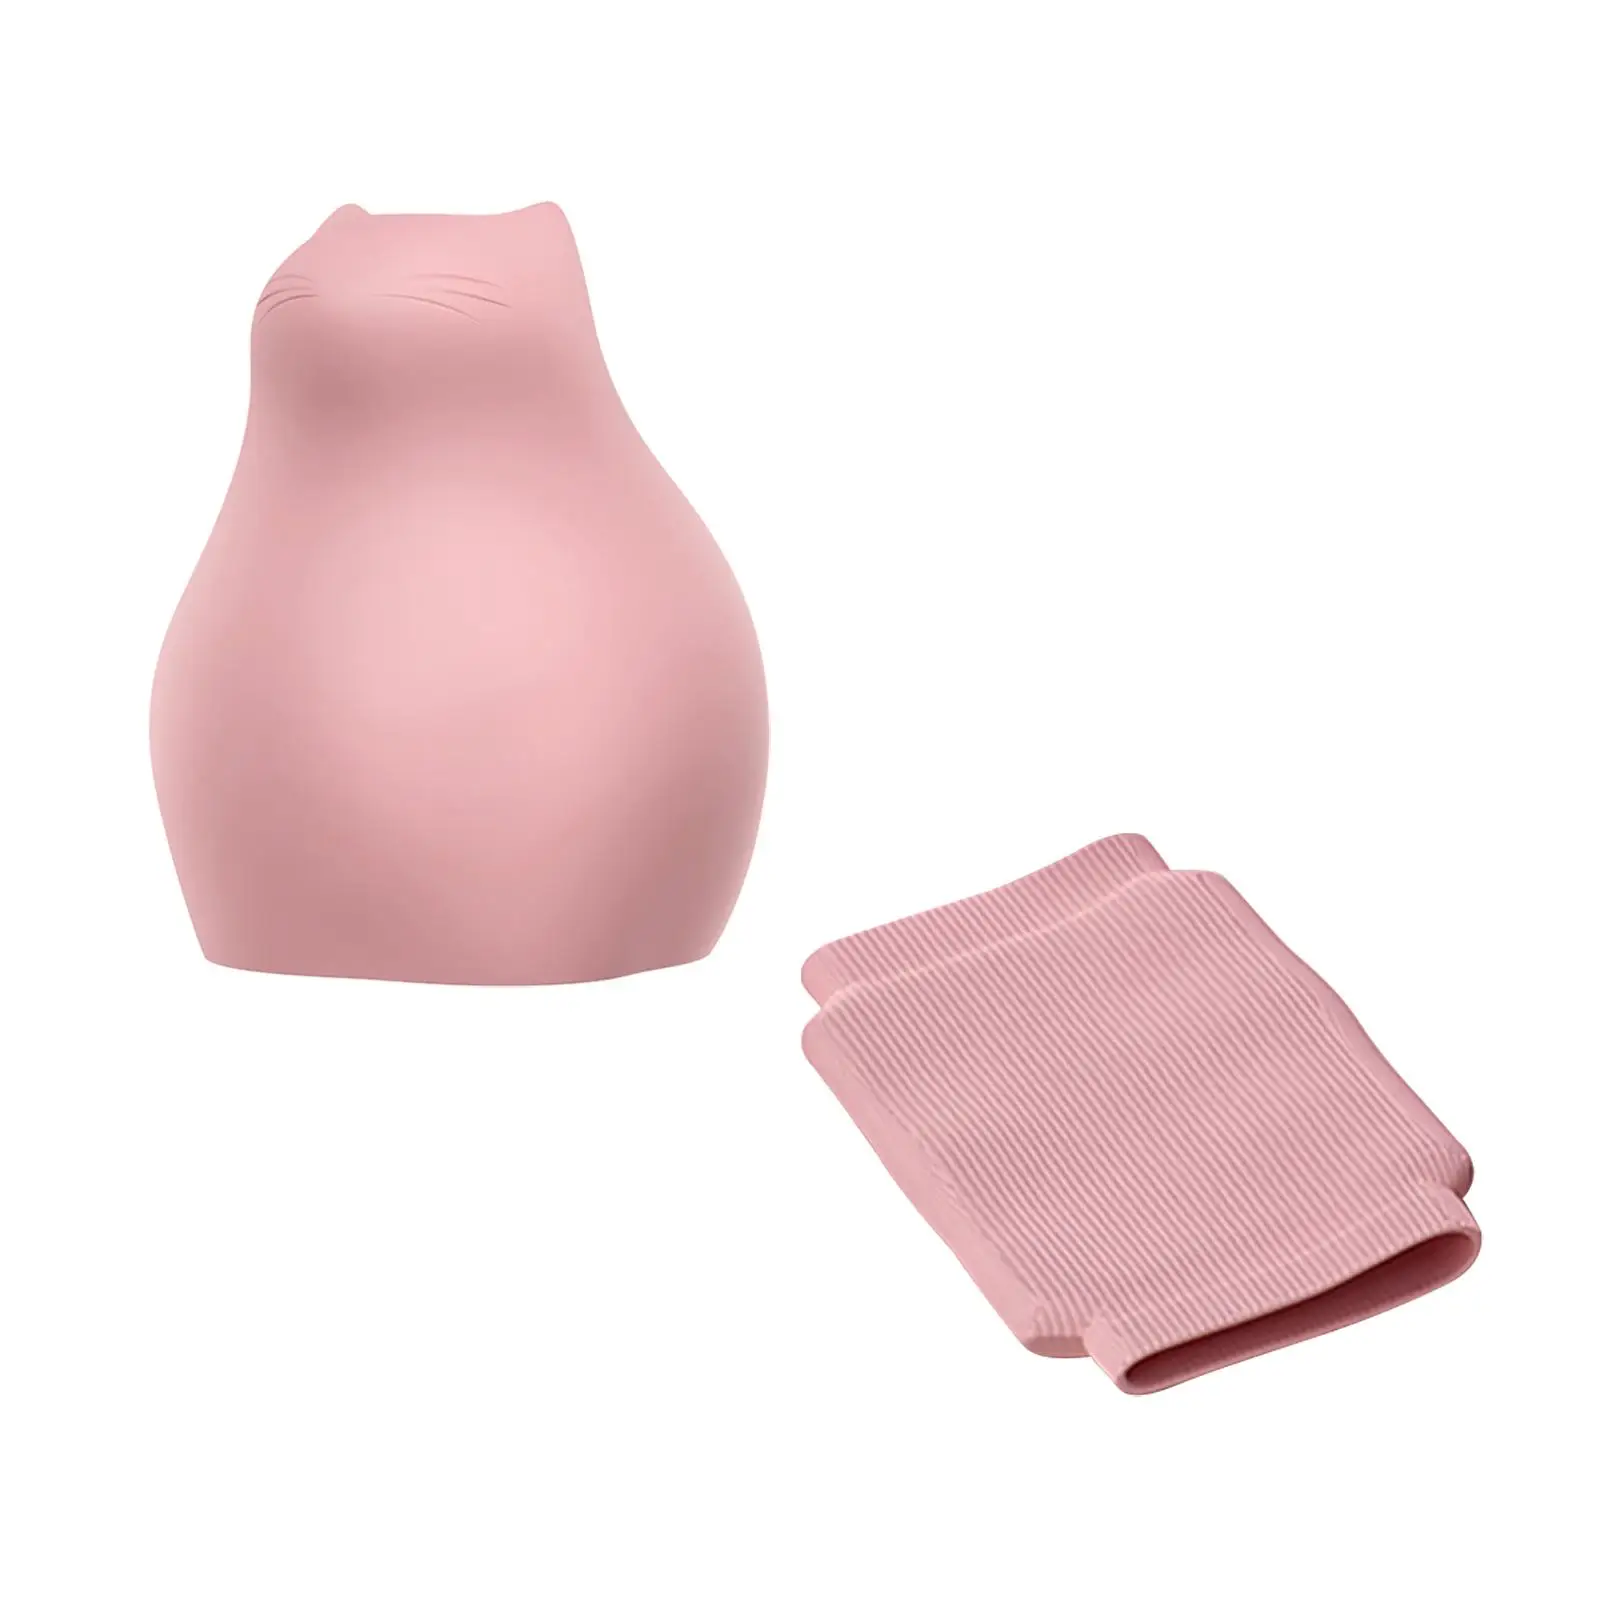 Silicone Hot Water Bag Soft Hot Water Bag Microwave Heating Portable Hand Warmer Warm Water Bag for Hand Feet Travel Office